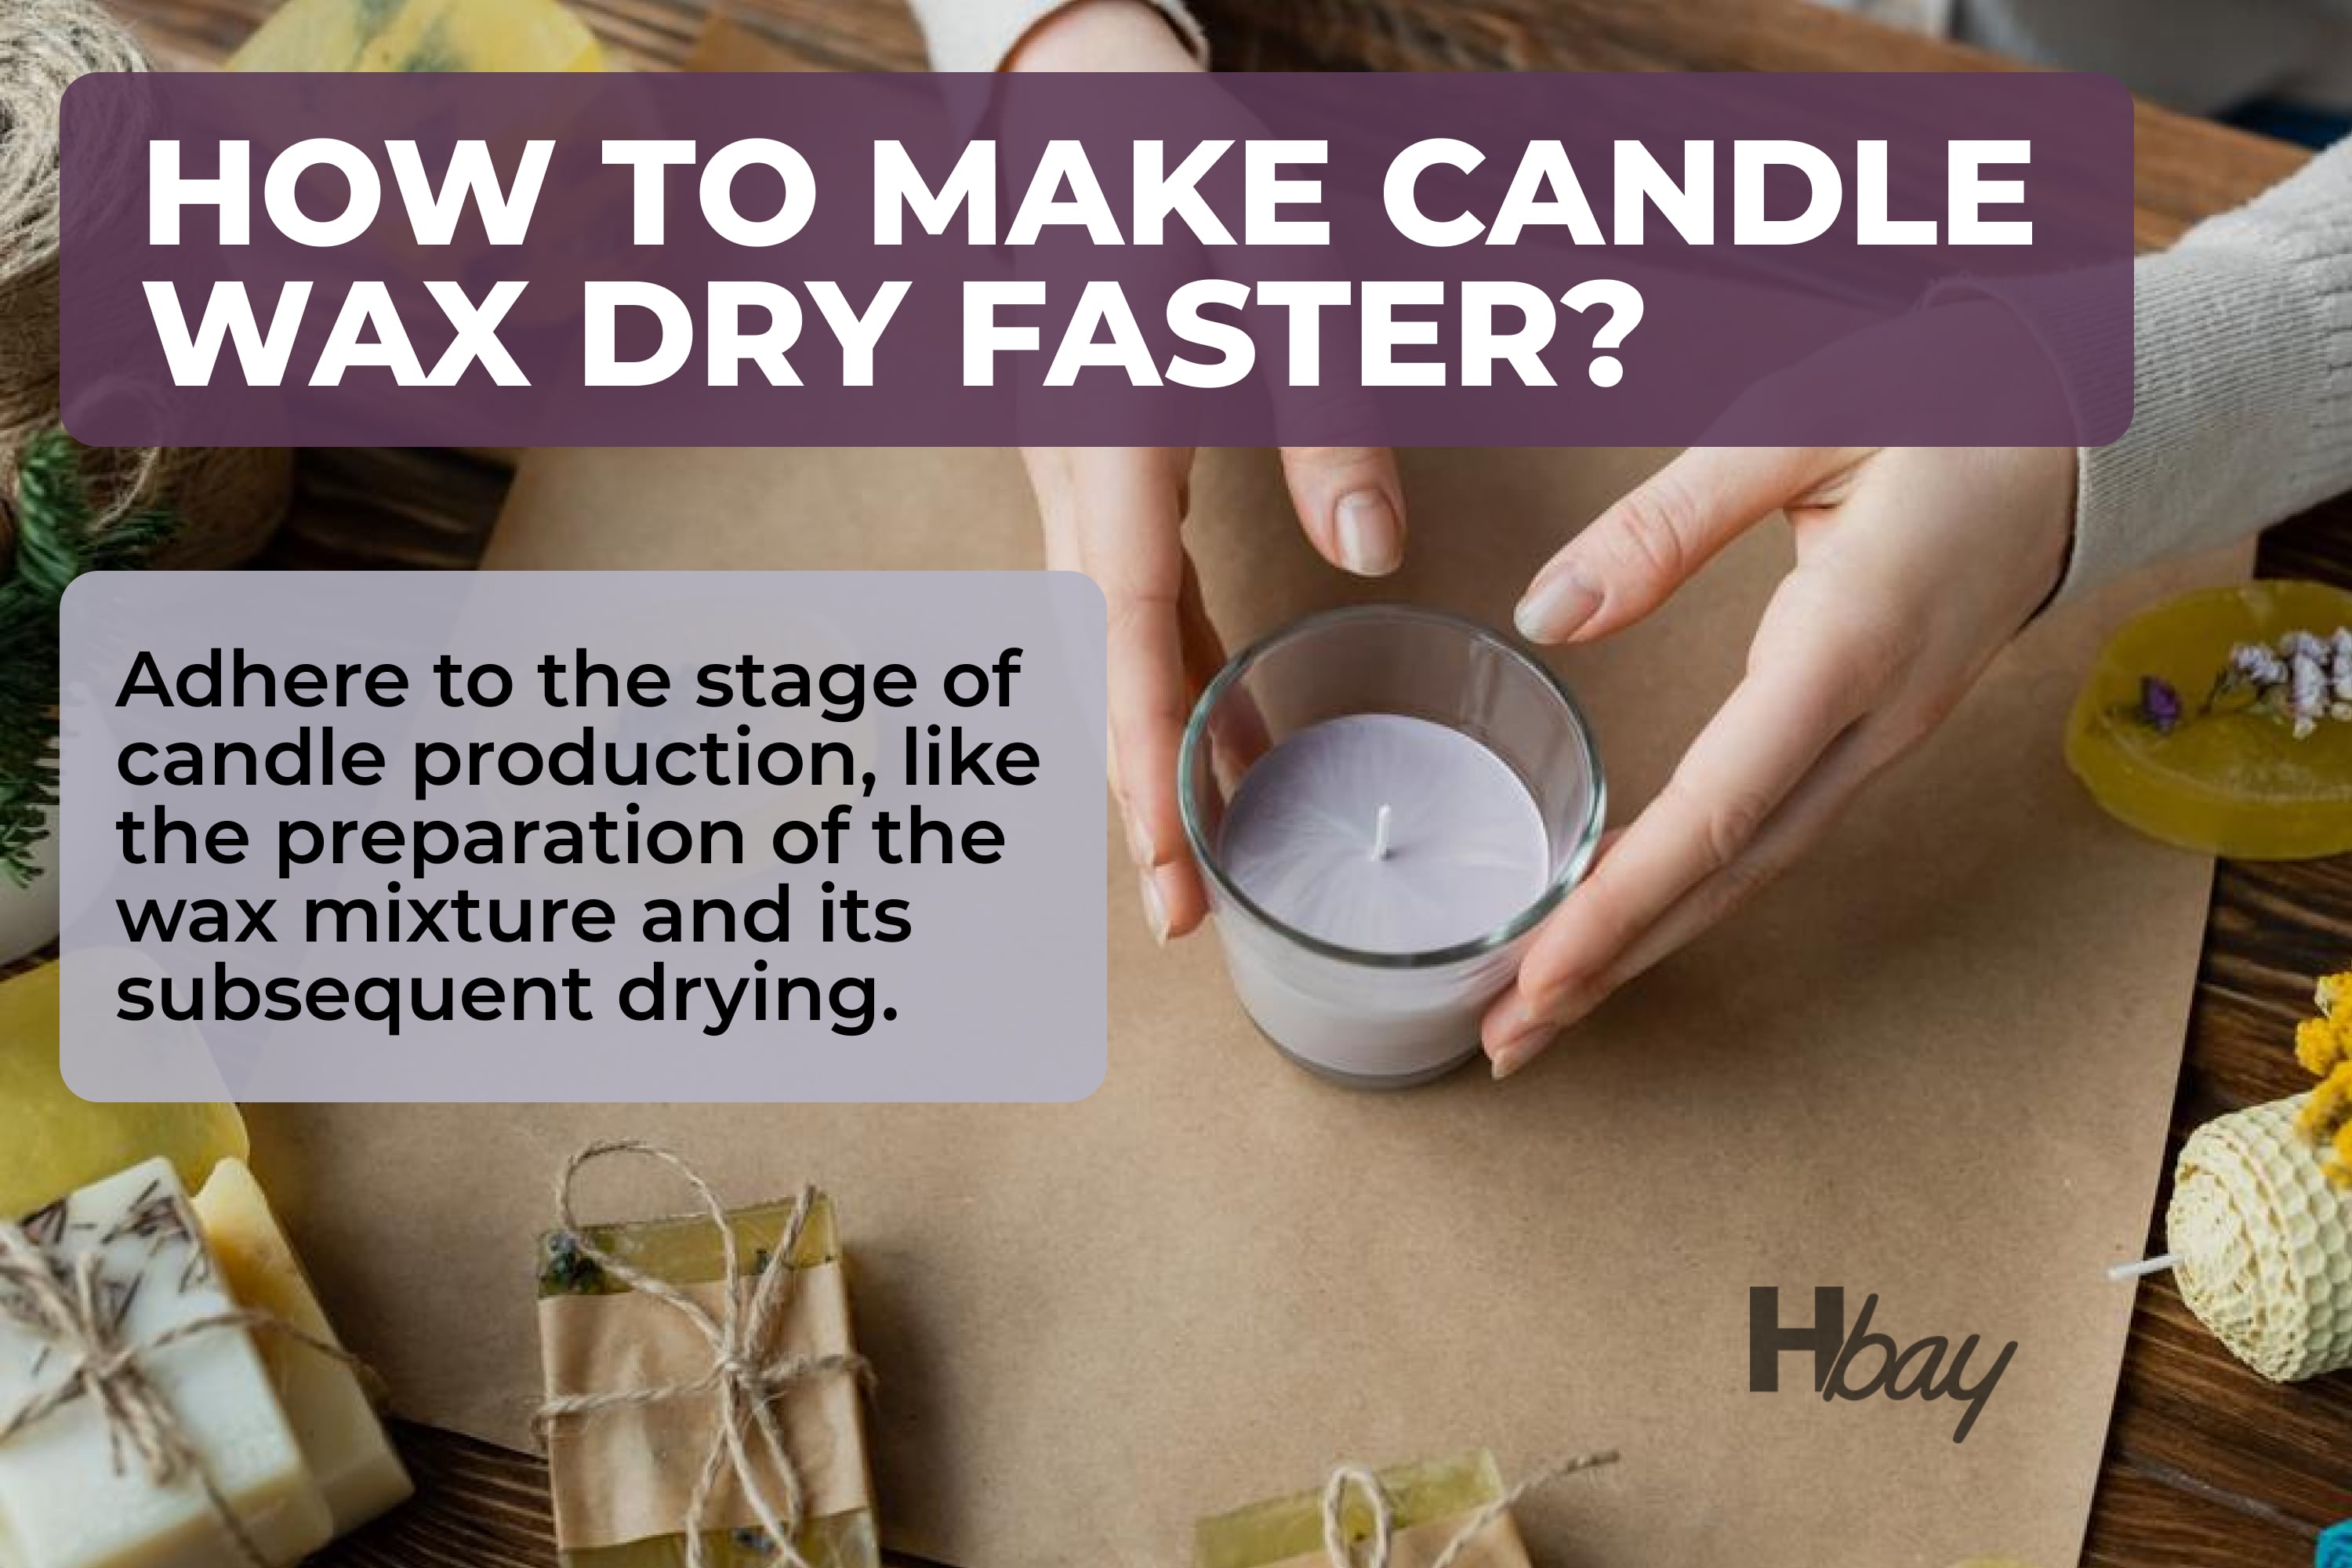 How to make candle wax dry faster